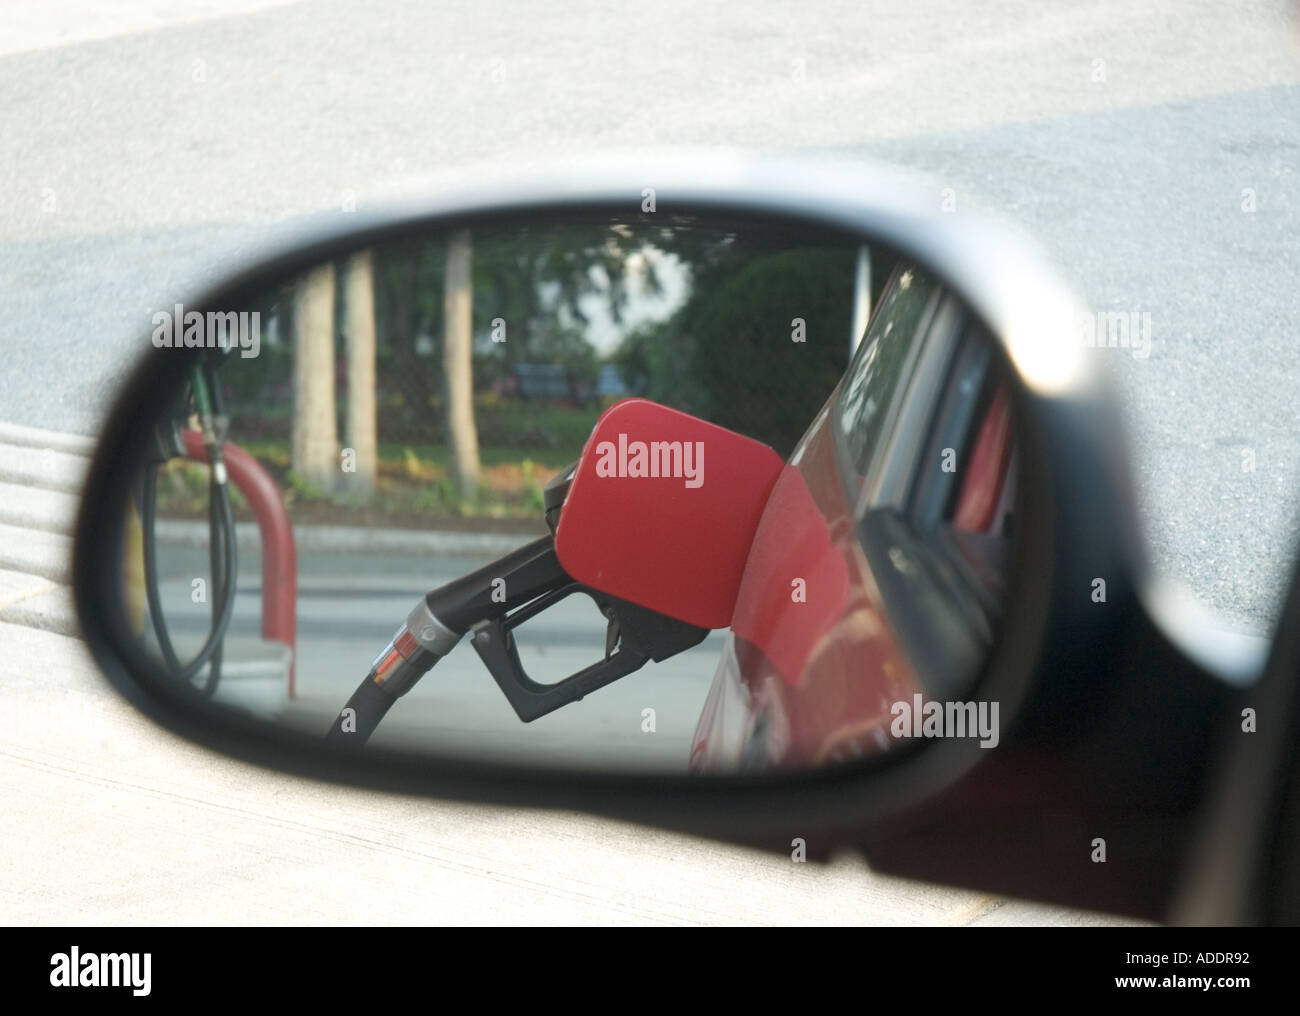 Rear view mirror reflection of a gasoline pump filling a car s fuel tank Stock Photo